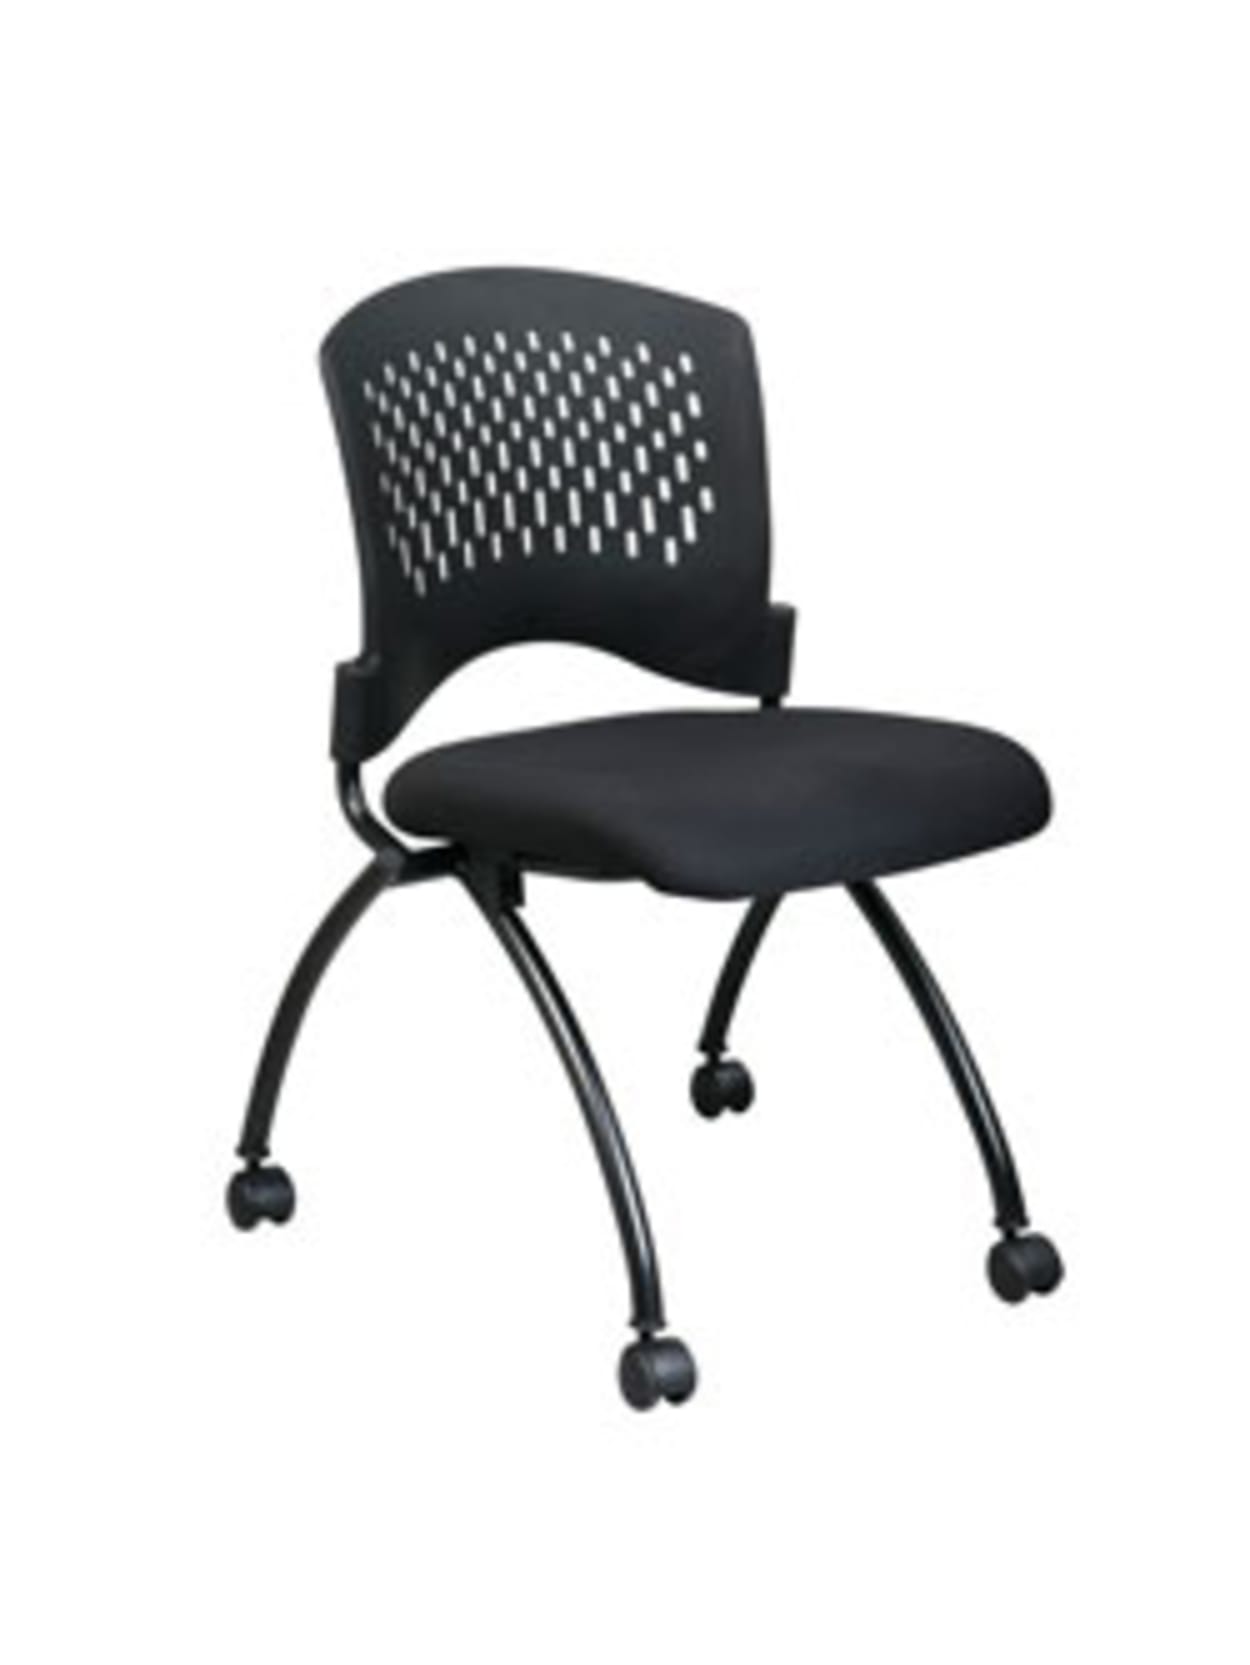 fold up chair with wheels